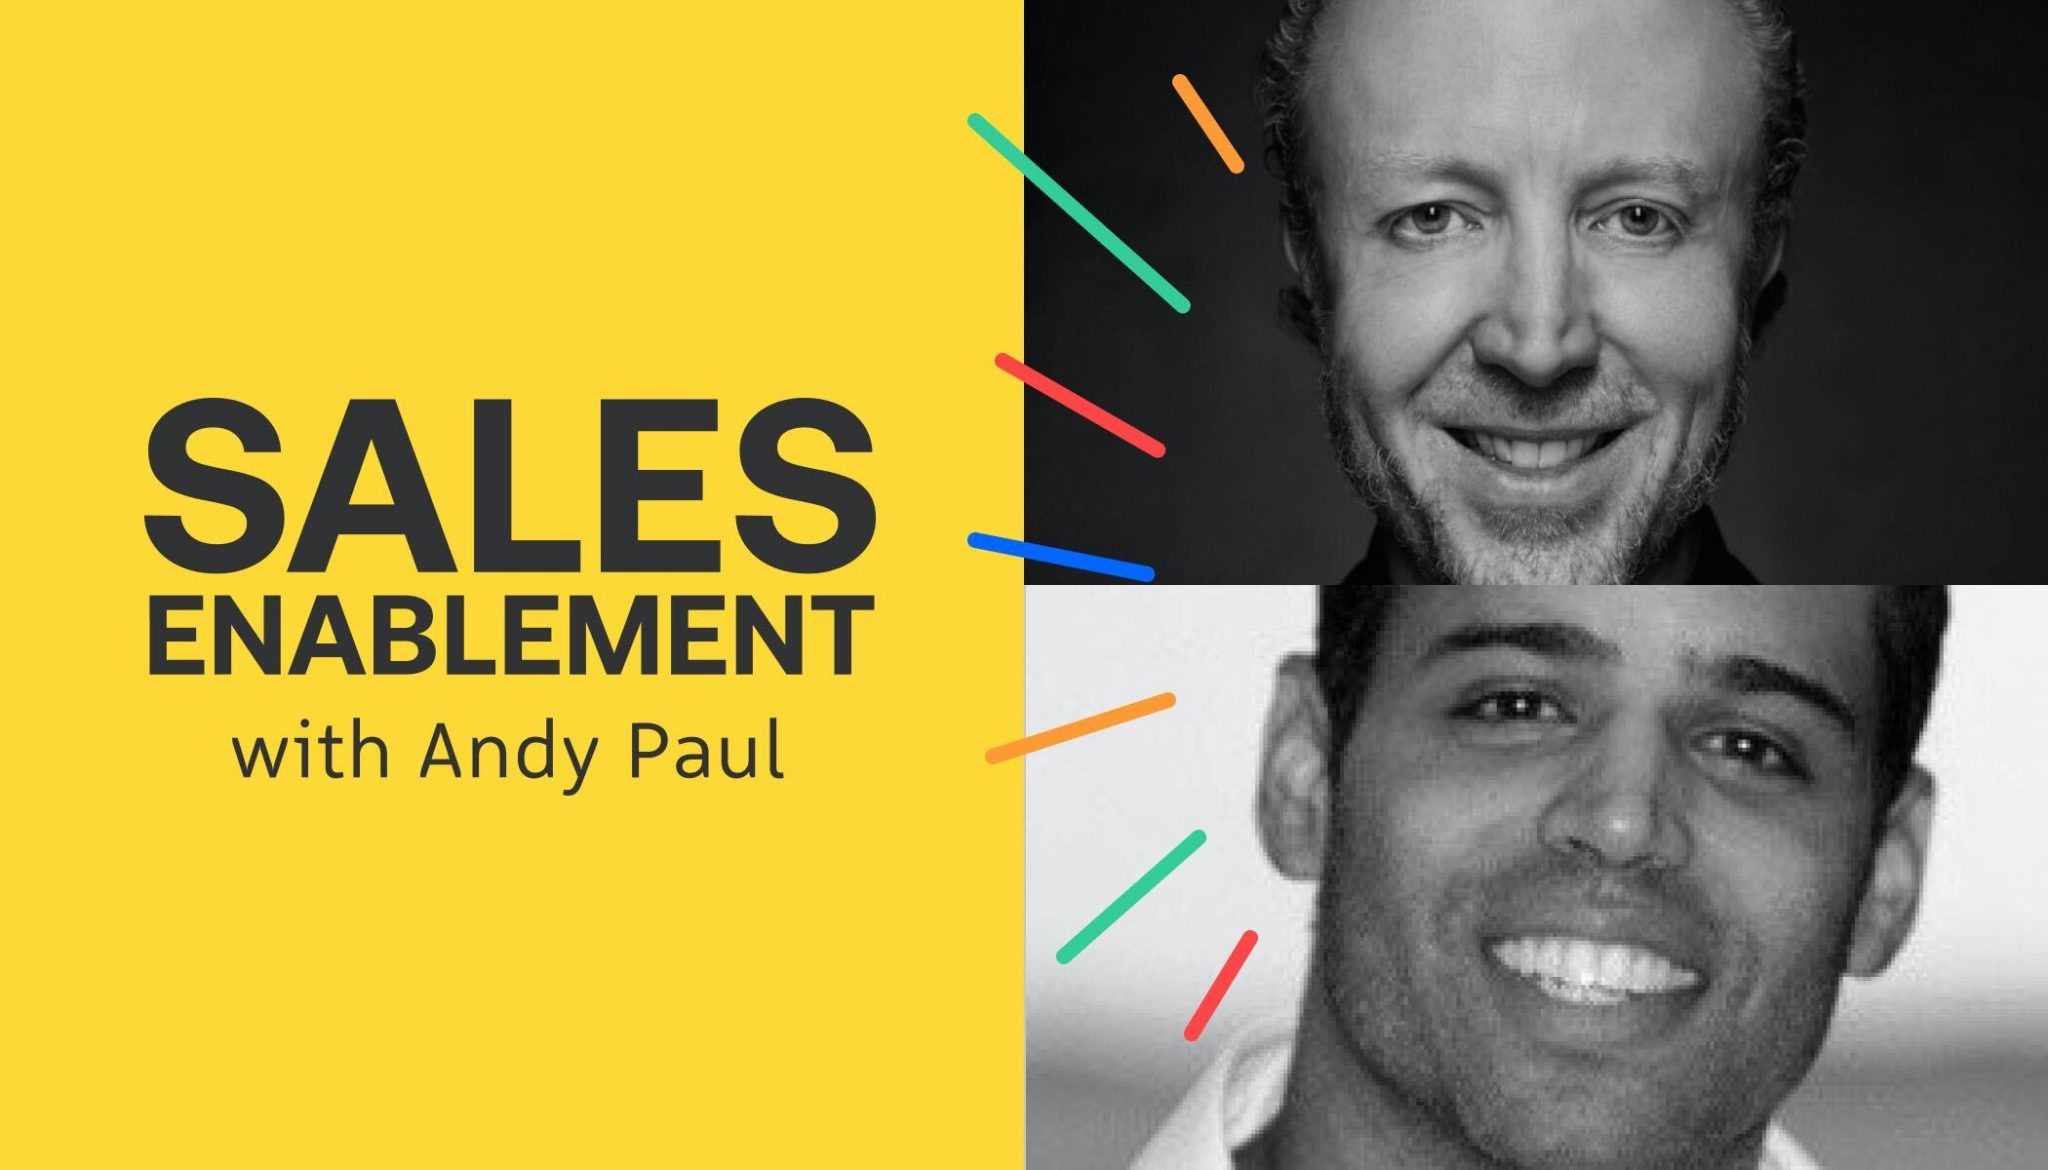 Helping SEALs Transition Into Sales with Chris Anthony and Robert Moeller